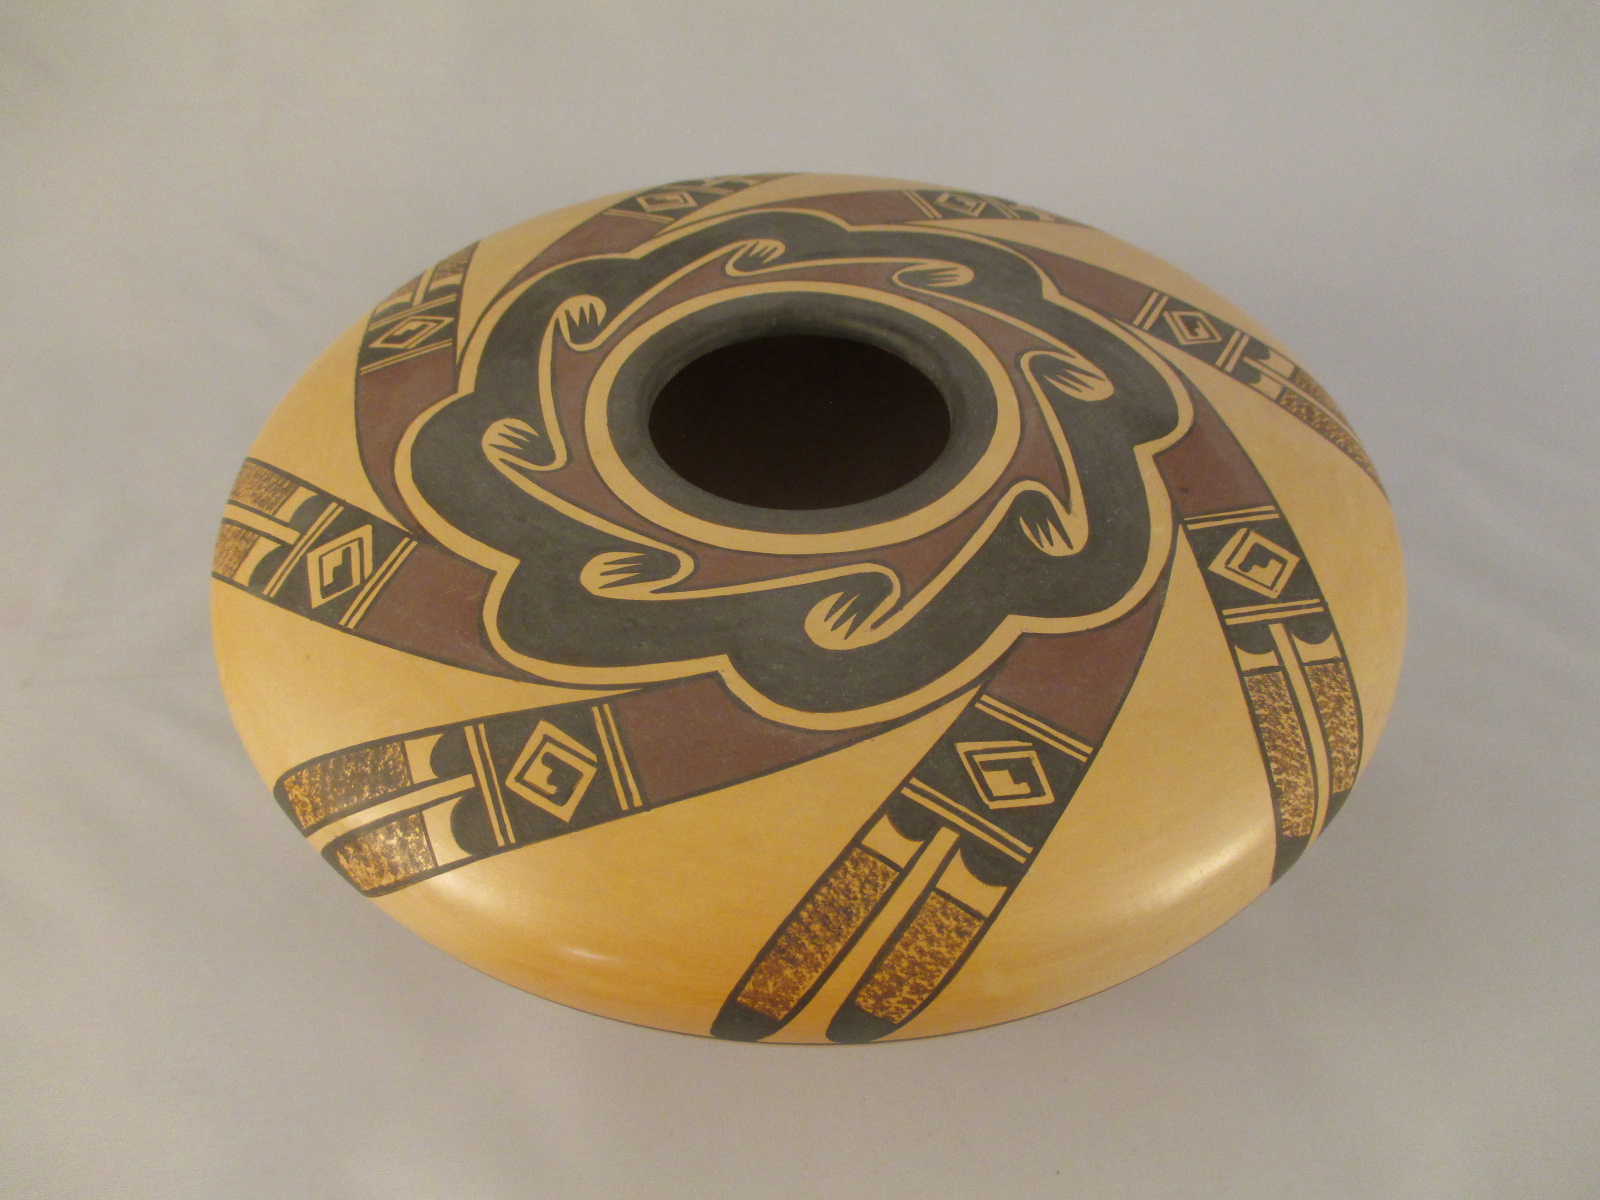 Hopi Indian Pottery - Wide Painted Pot by Native American (Hopi) potter, Fawn Navasie $950-